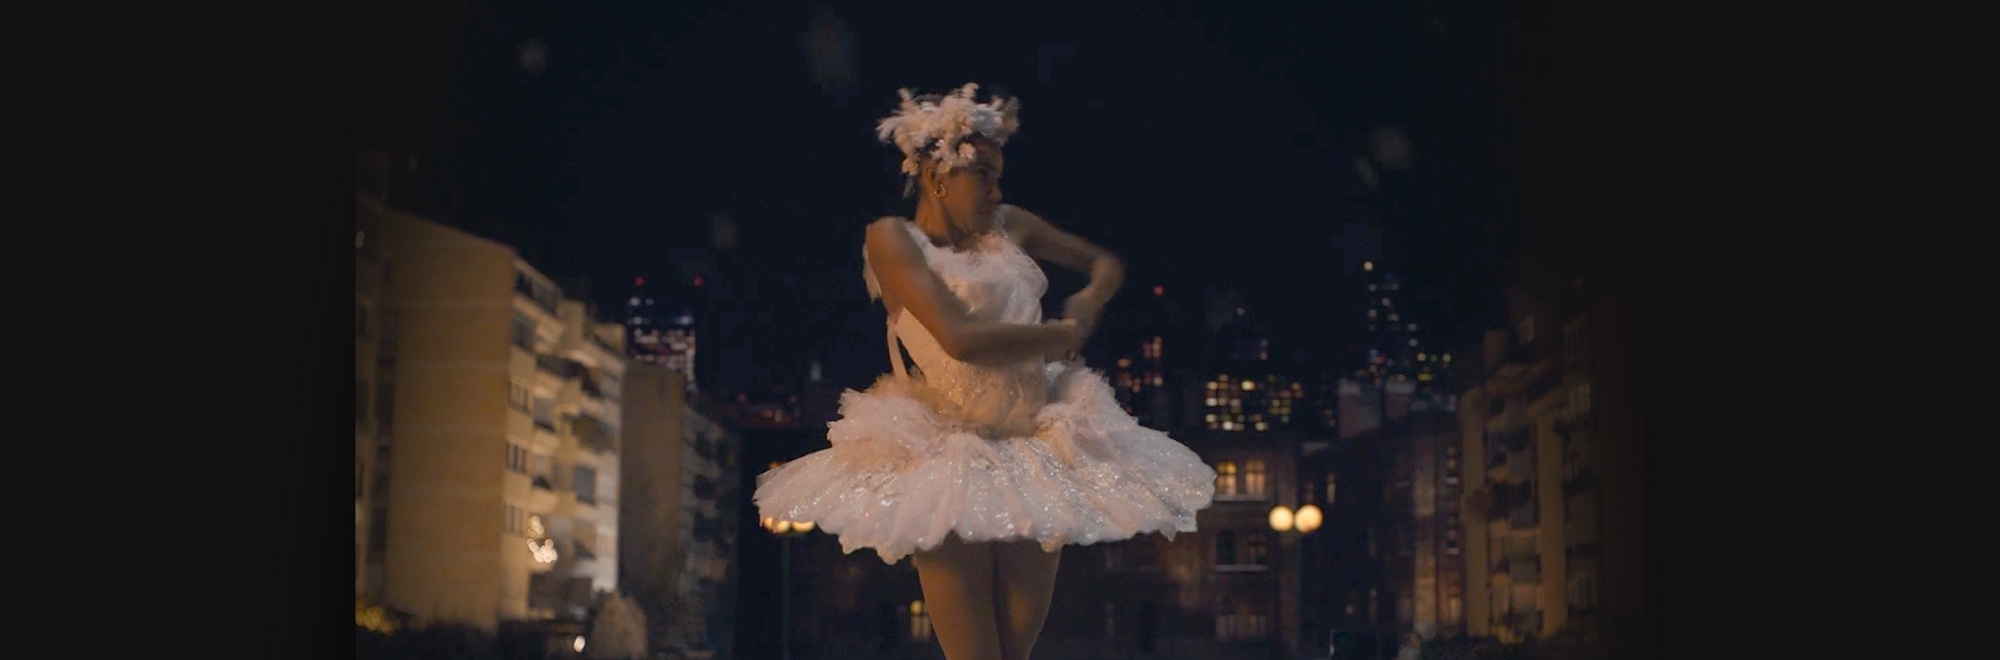 The Show Must Go On: Ballet dancer shines in this Christmas spot for Amazon by Lucky Generals